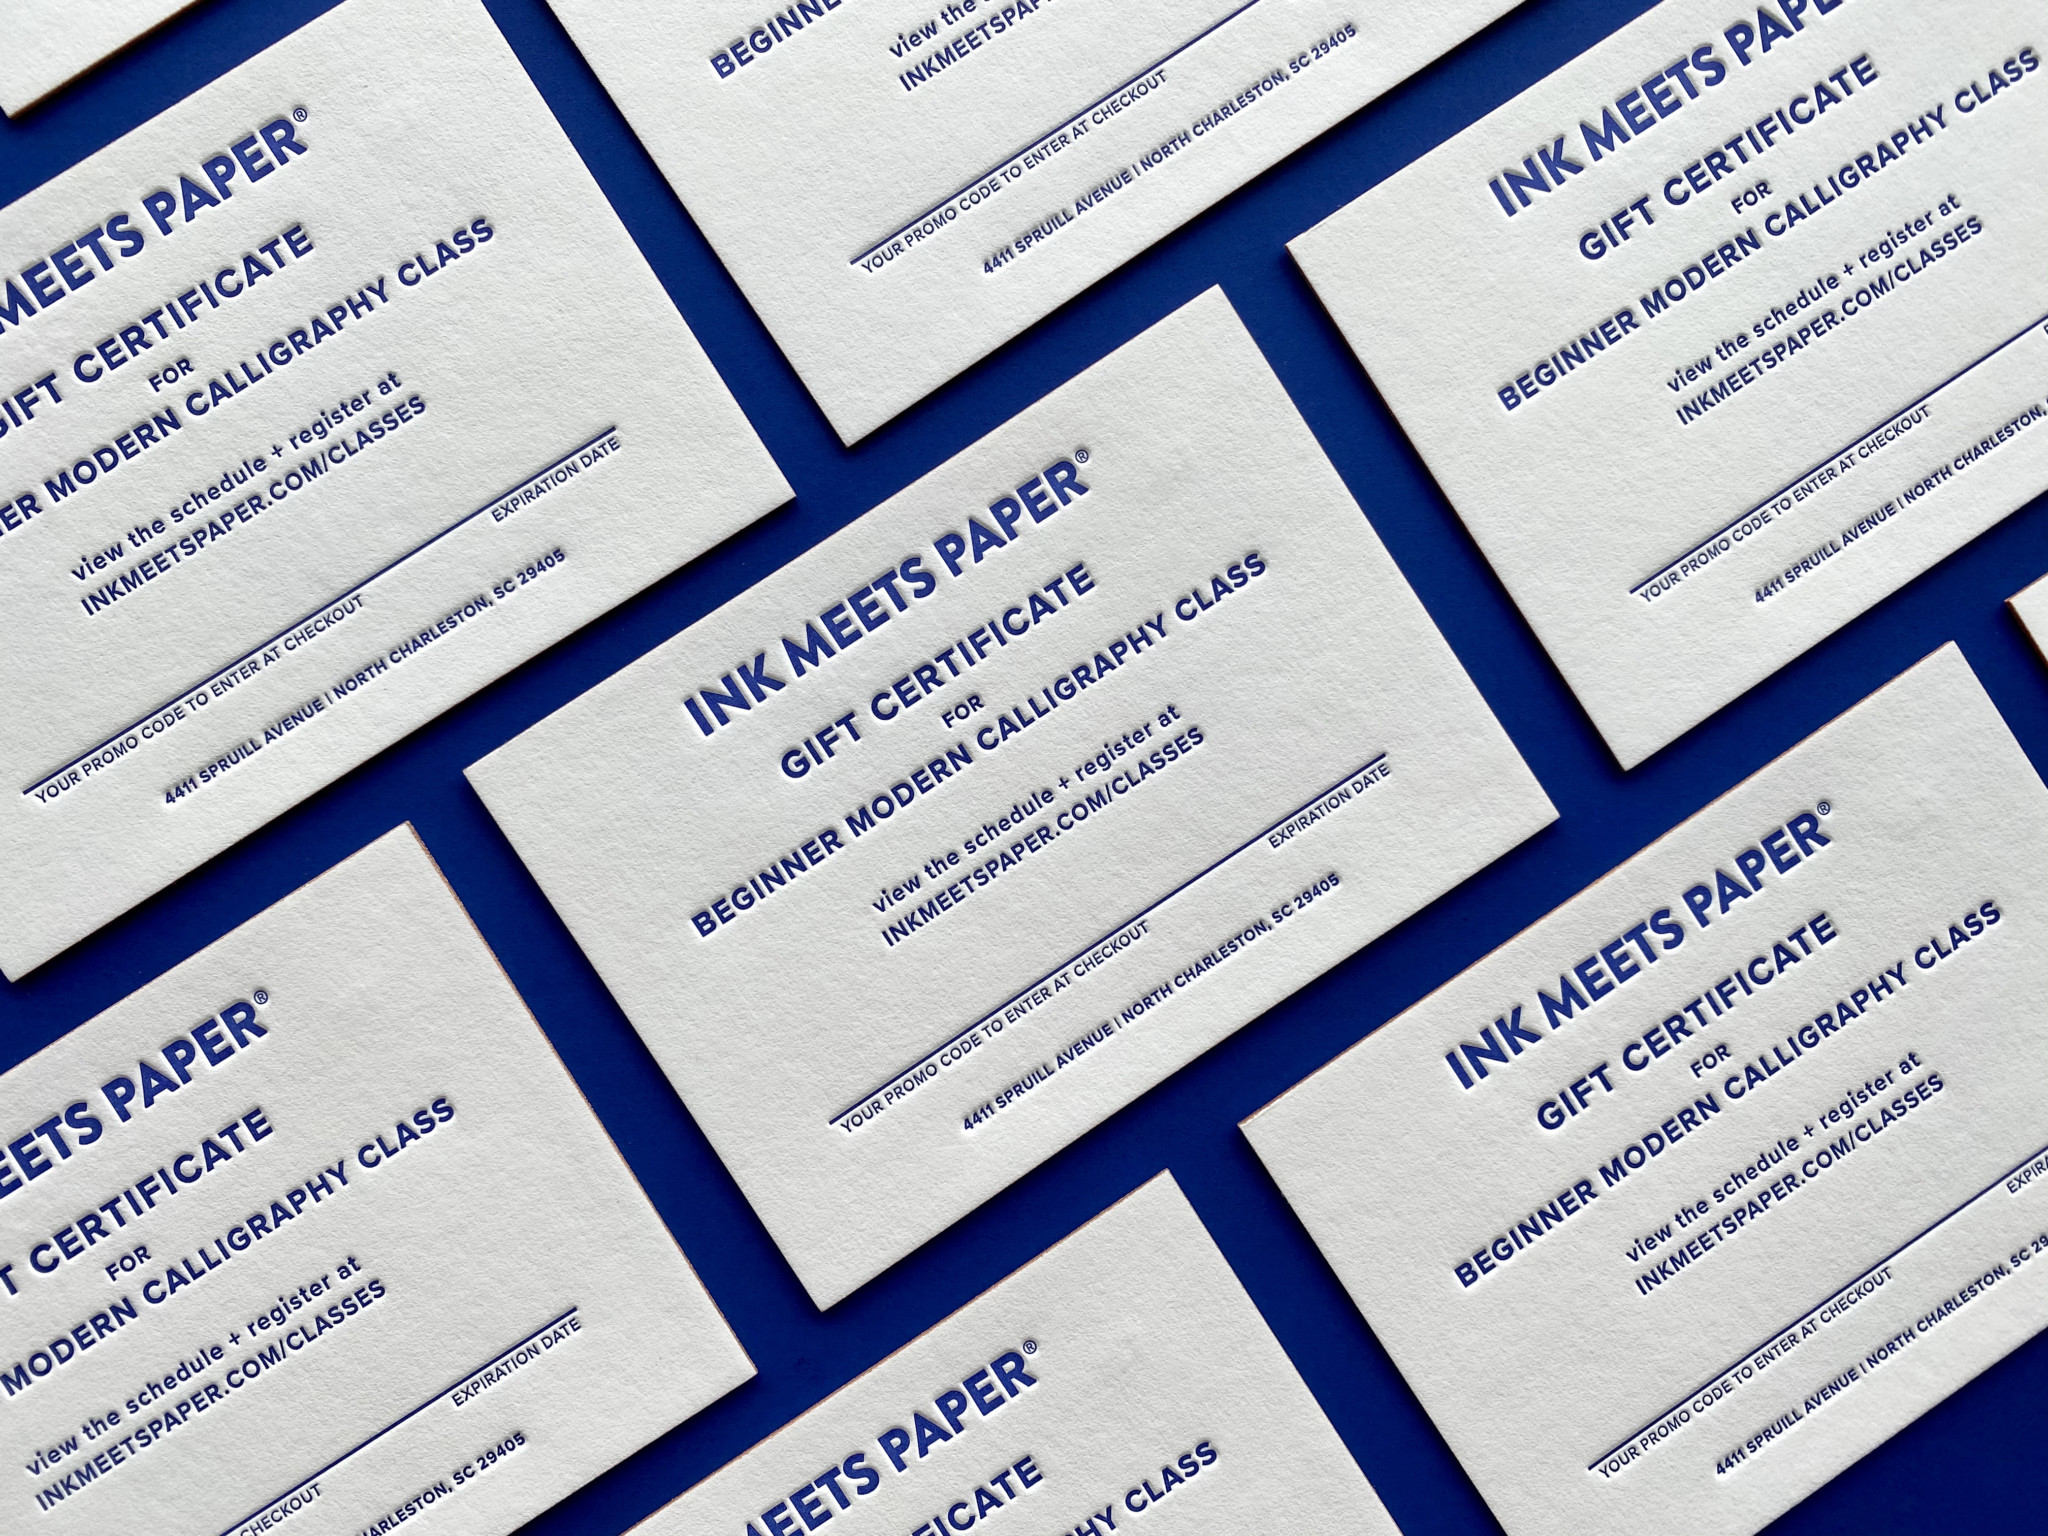 Letterpress-printed Gift Certificates laid out in a diagonal grid on a cobalt blue background.